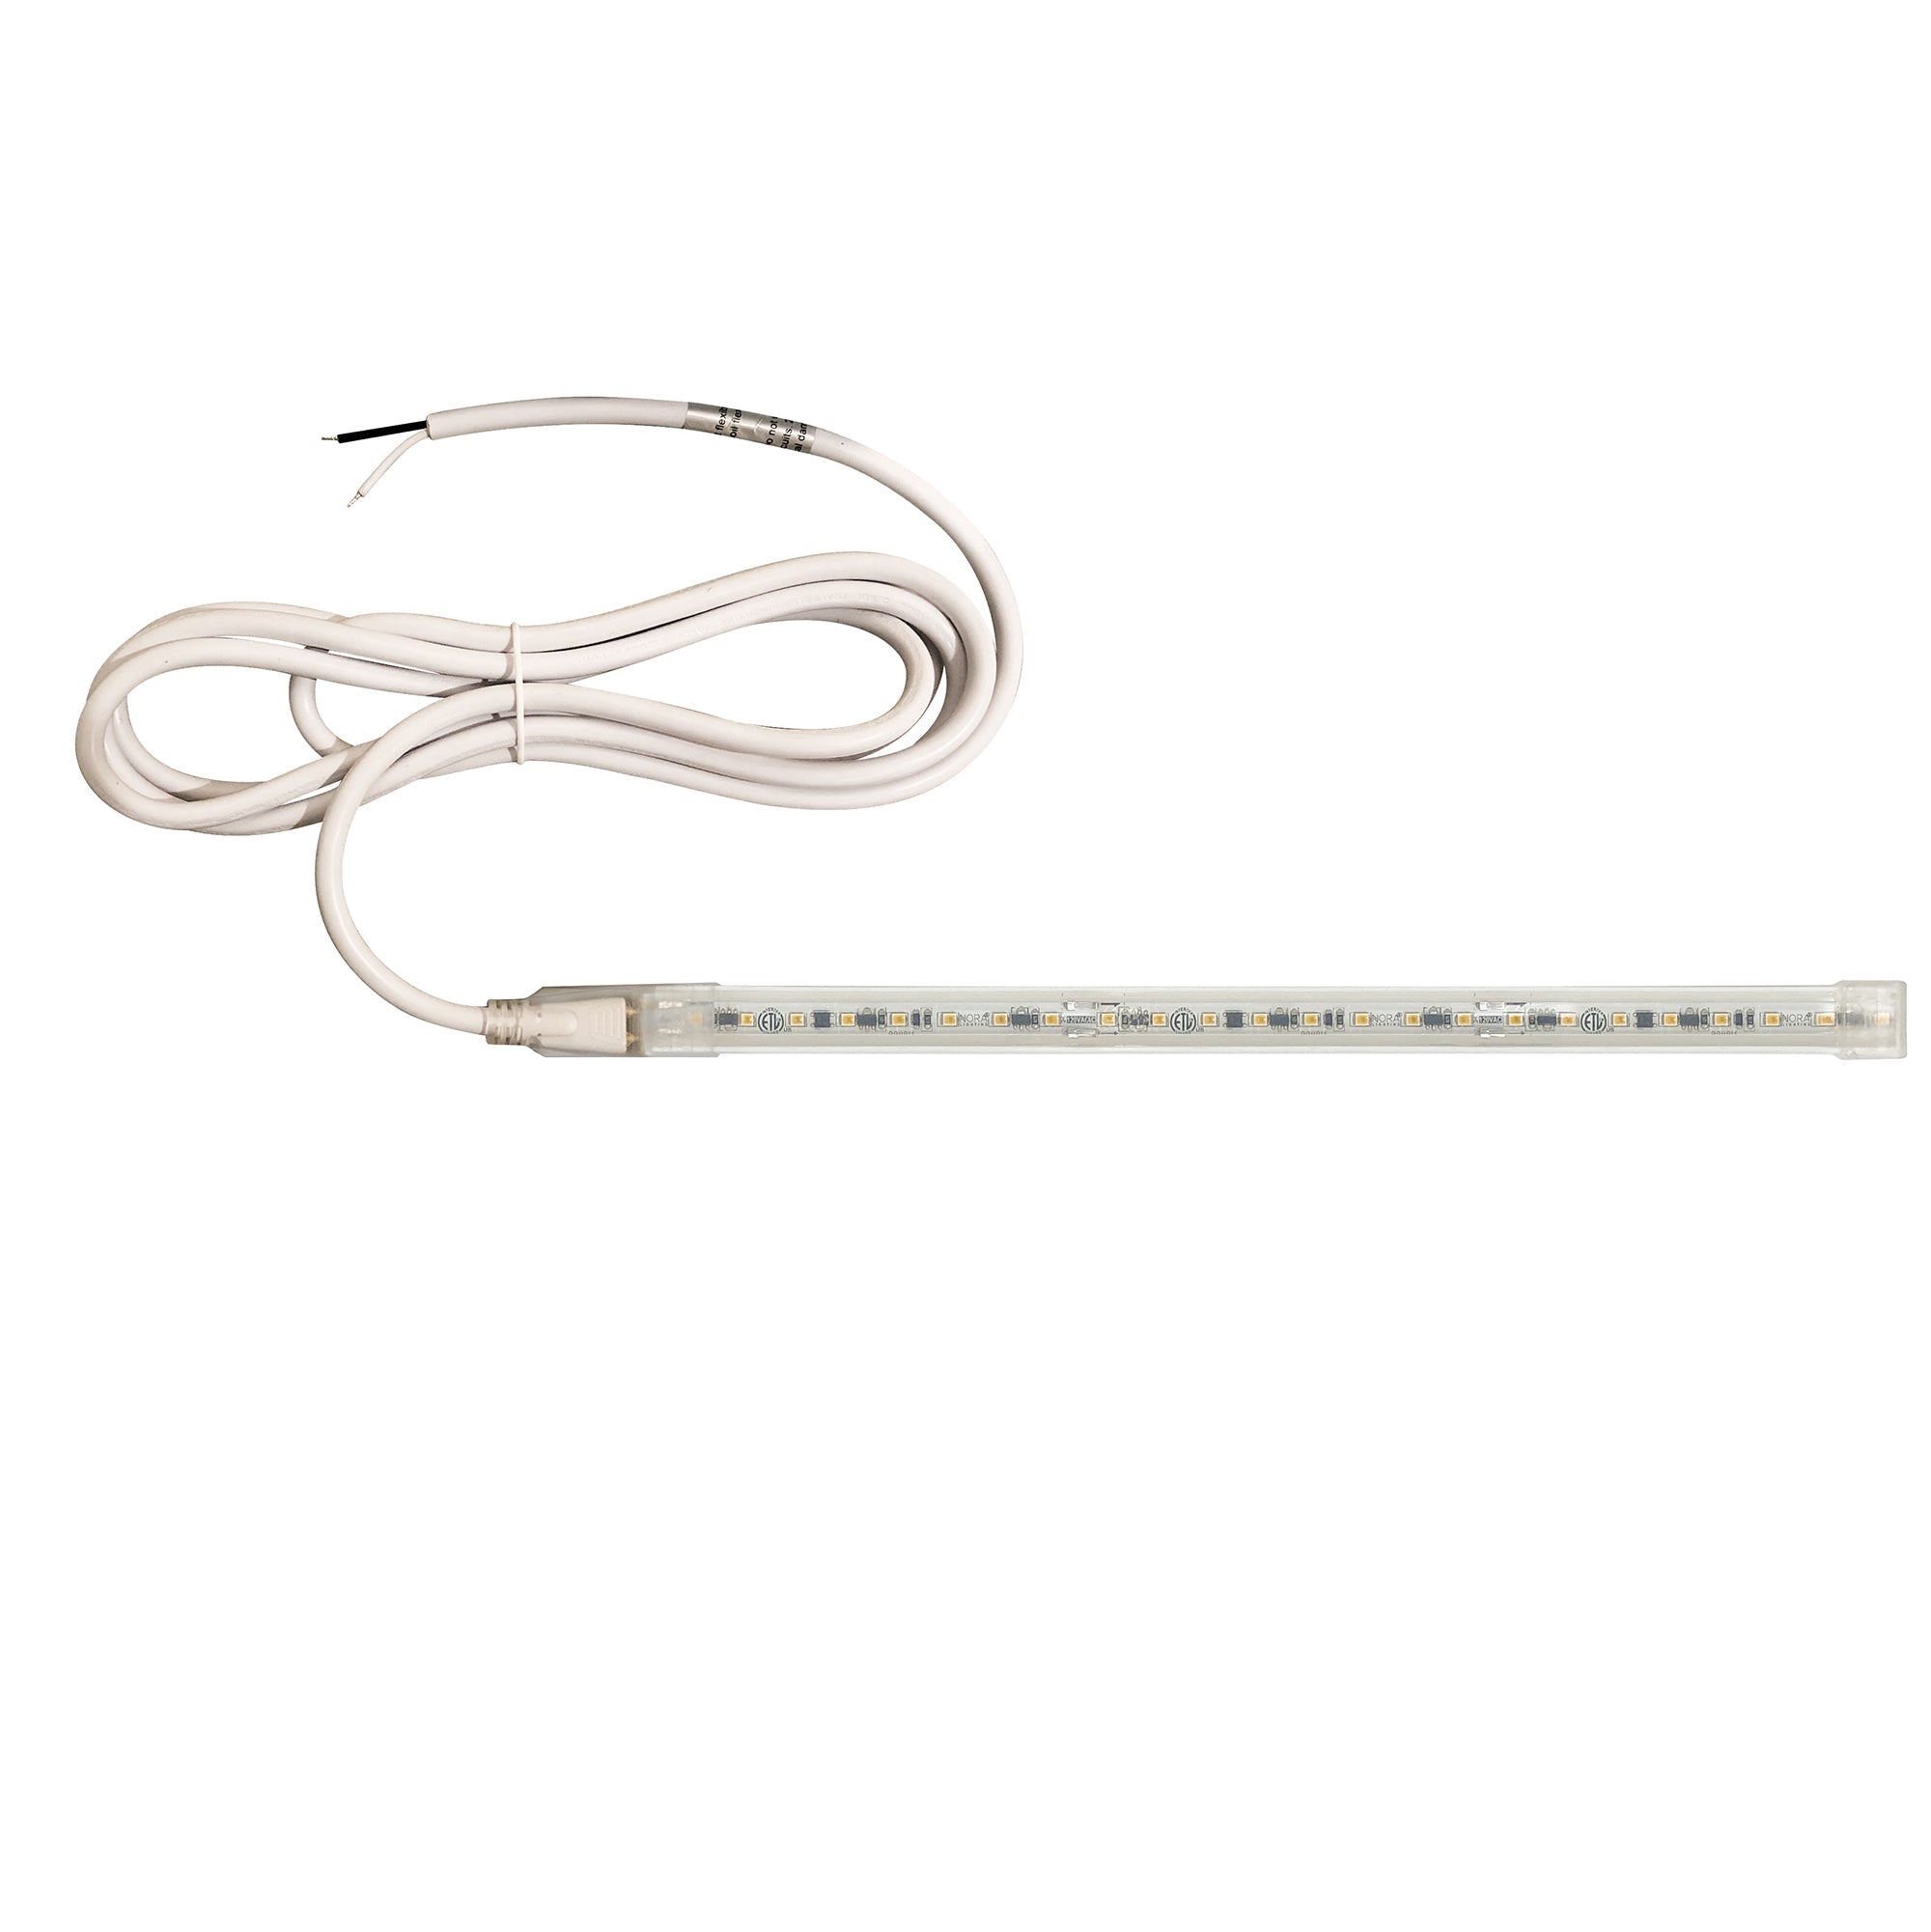 Nora Lighting NUTP13-W10-12-927/HW - Accent / Undercabinet - Custom Cut 10-ft 120V Continuous LED Tape Light, 330lm / 3.6W per foot, 2700K, w/ Mounting Clips and 8' Hardwired Power Cord